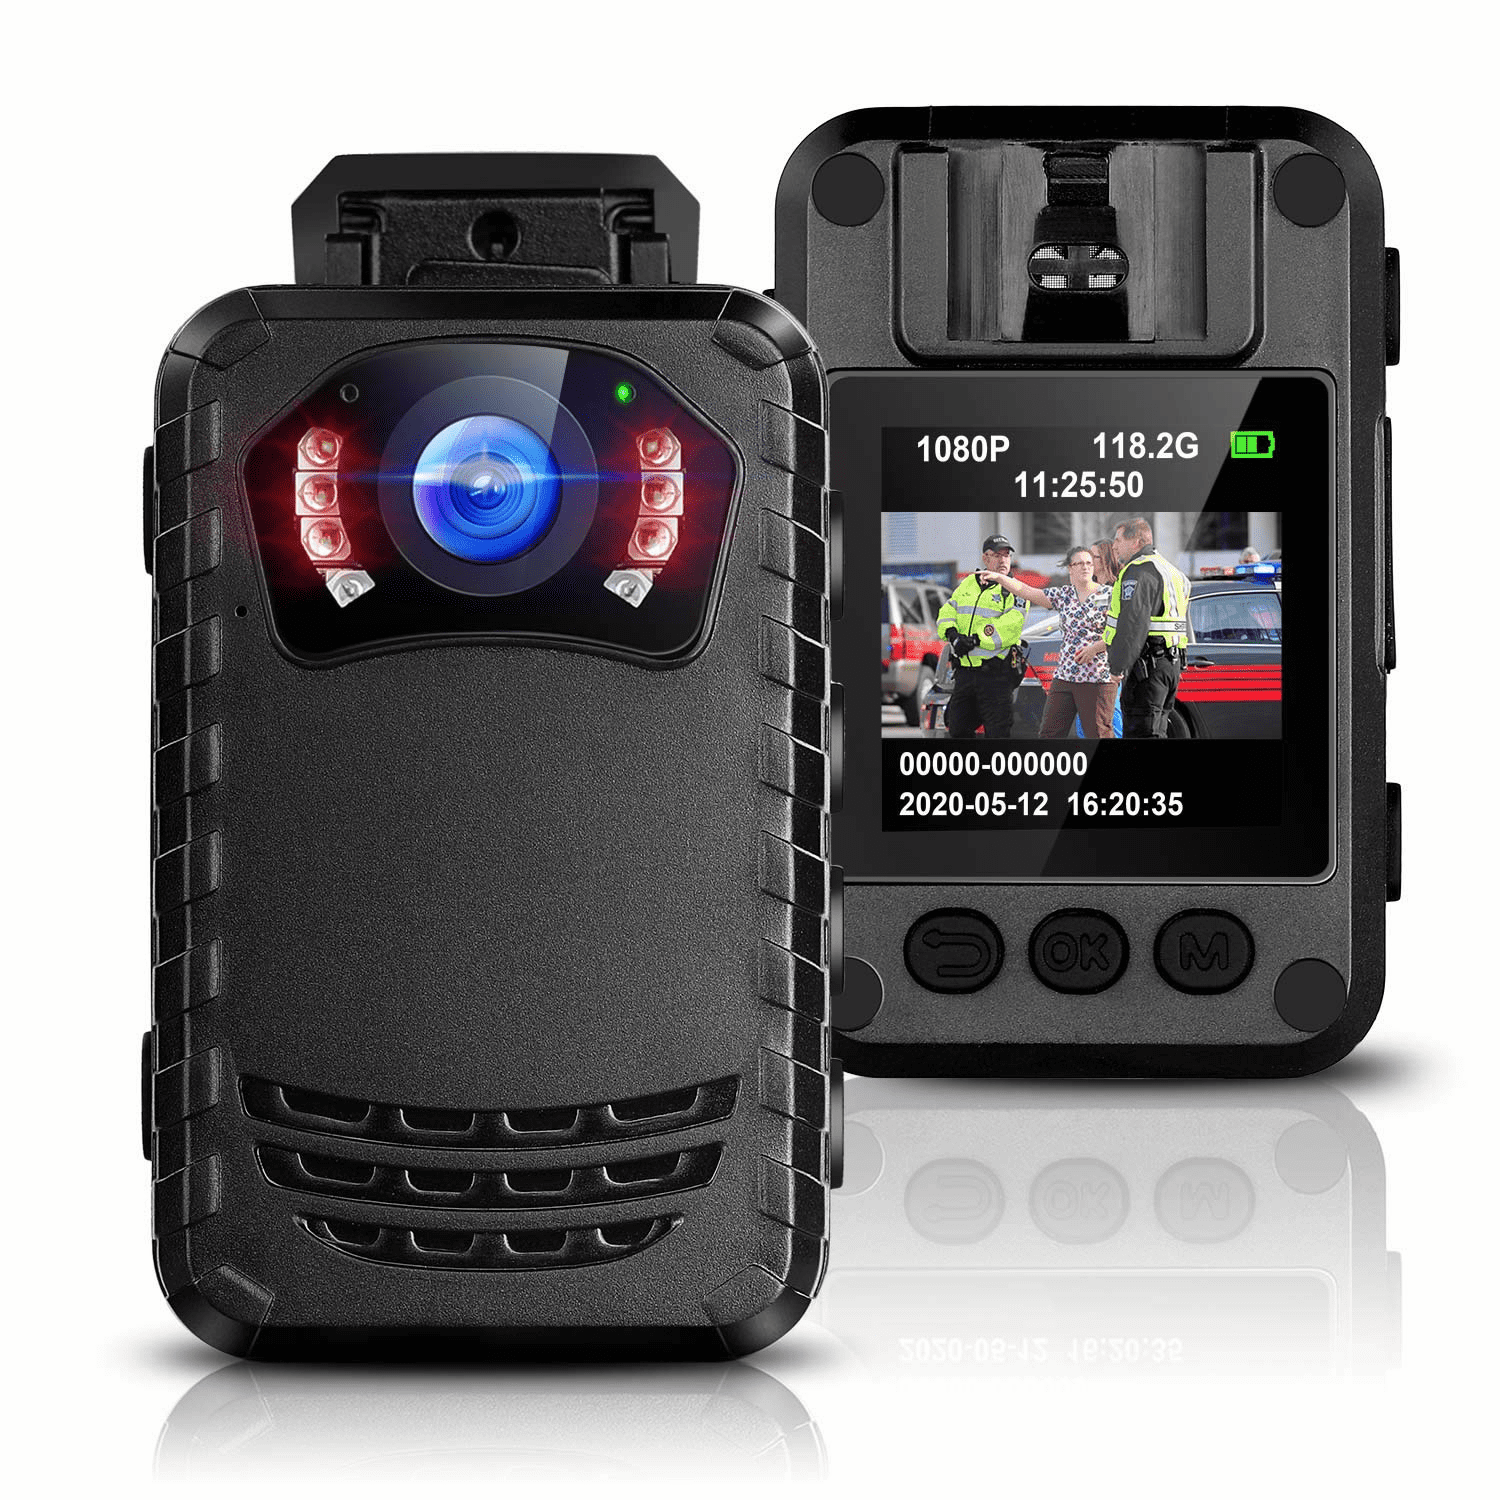 CammPro I826 1296P HD Police Body Camera,128G Memory,Waterproof Body Worn  Camera,Premium Portable Body Camera with Audio Recording Wearable,Night  Vision,GPS for Law Enforcement